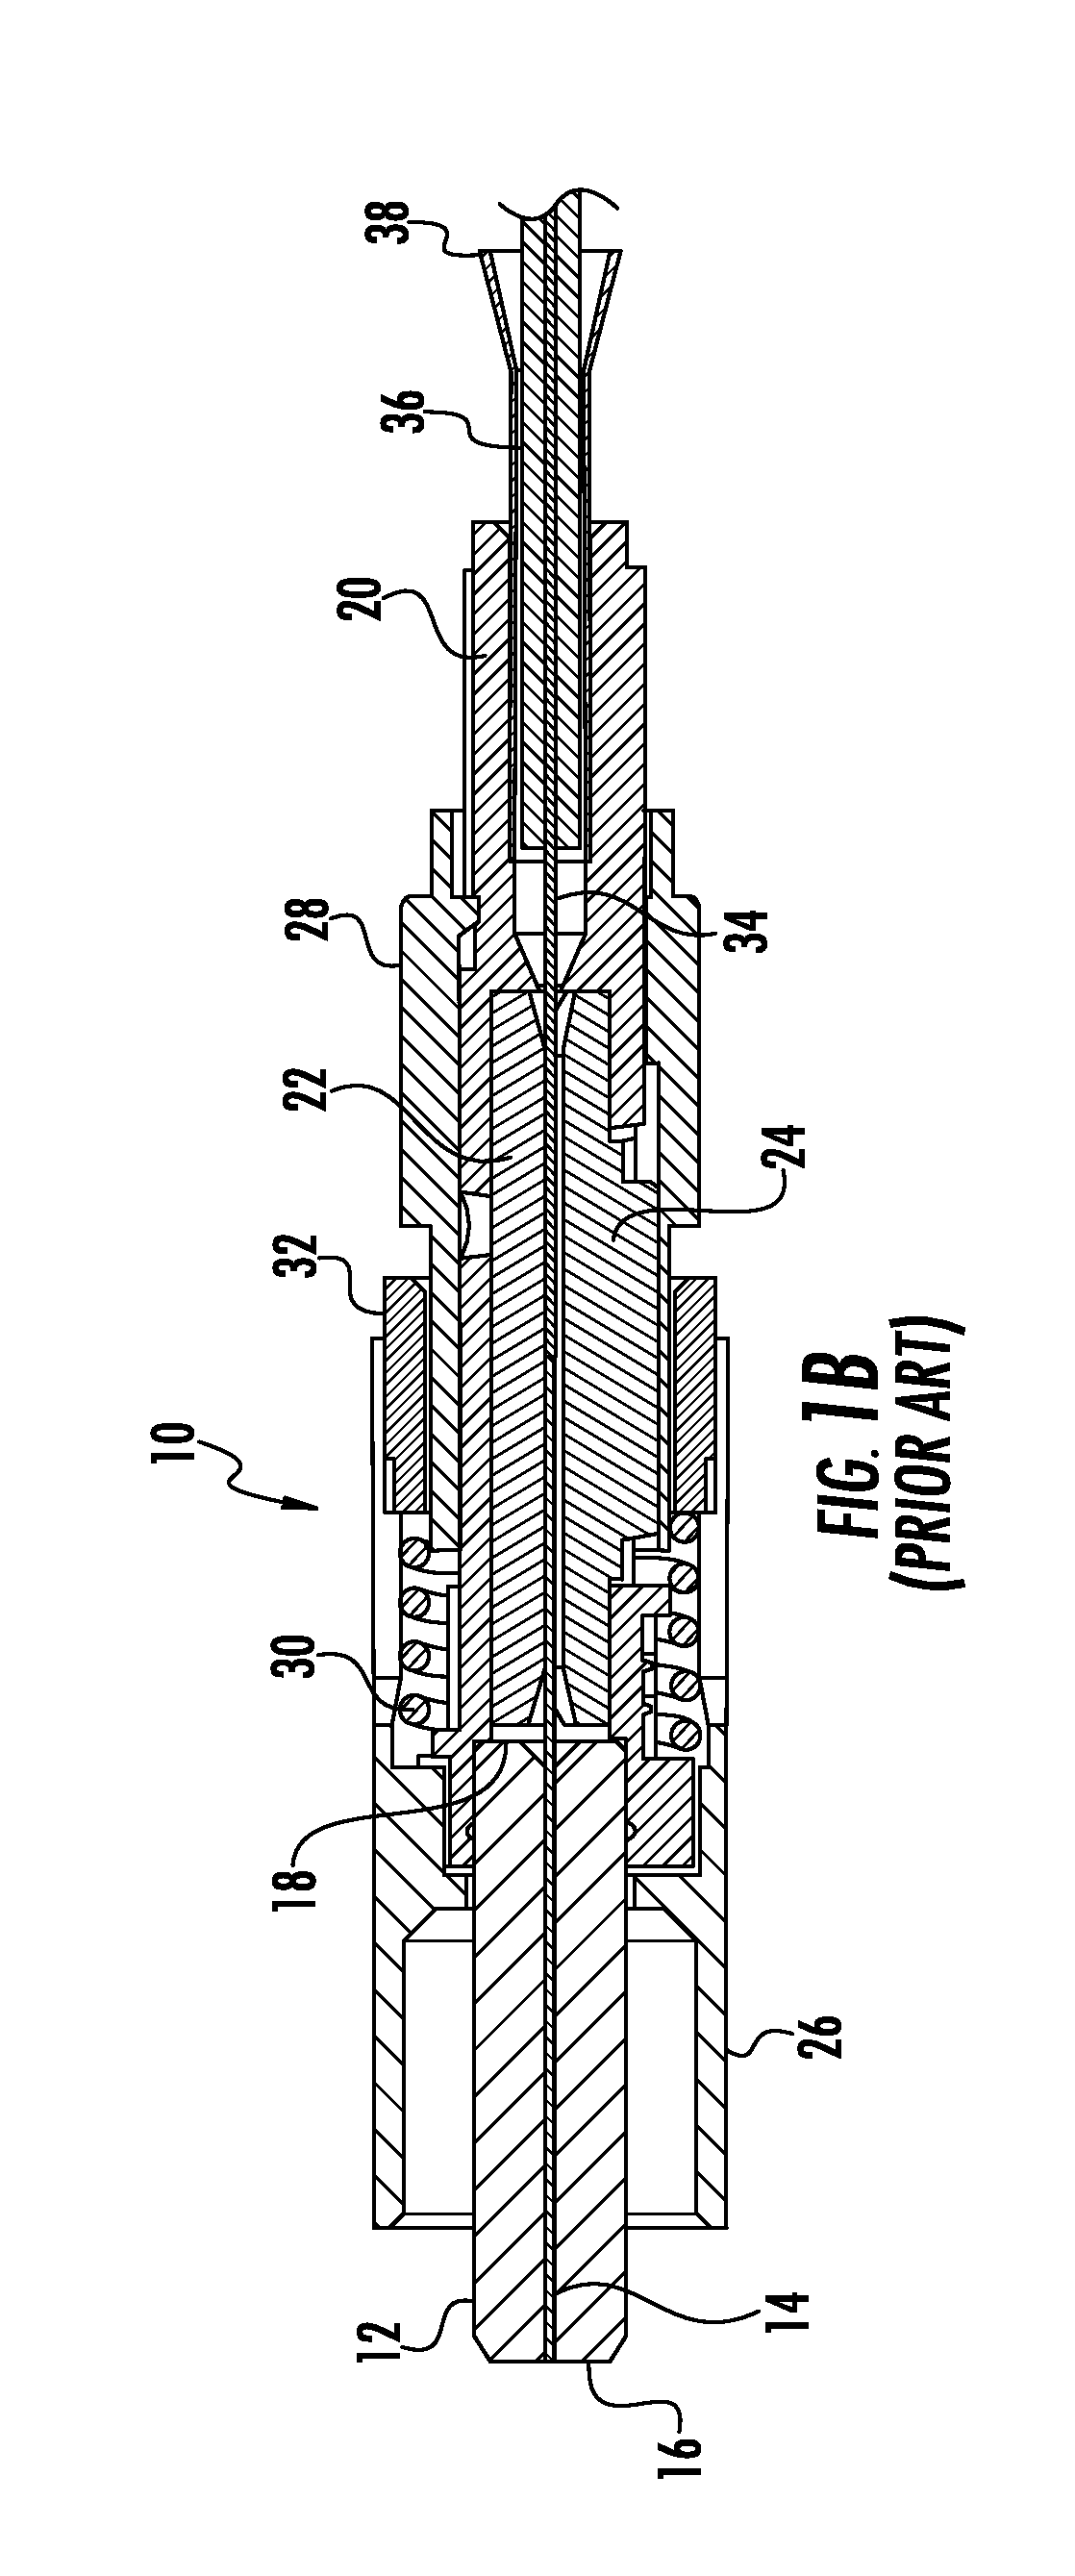 Detachable optical fiber guides for splice connector installation tools, and related assemblies and methods